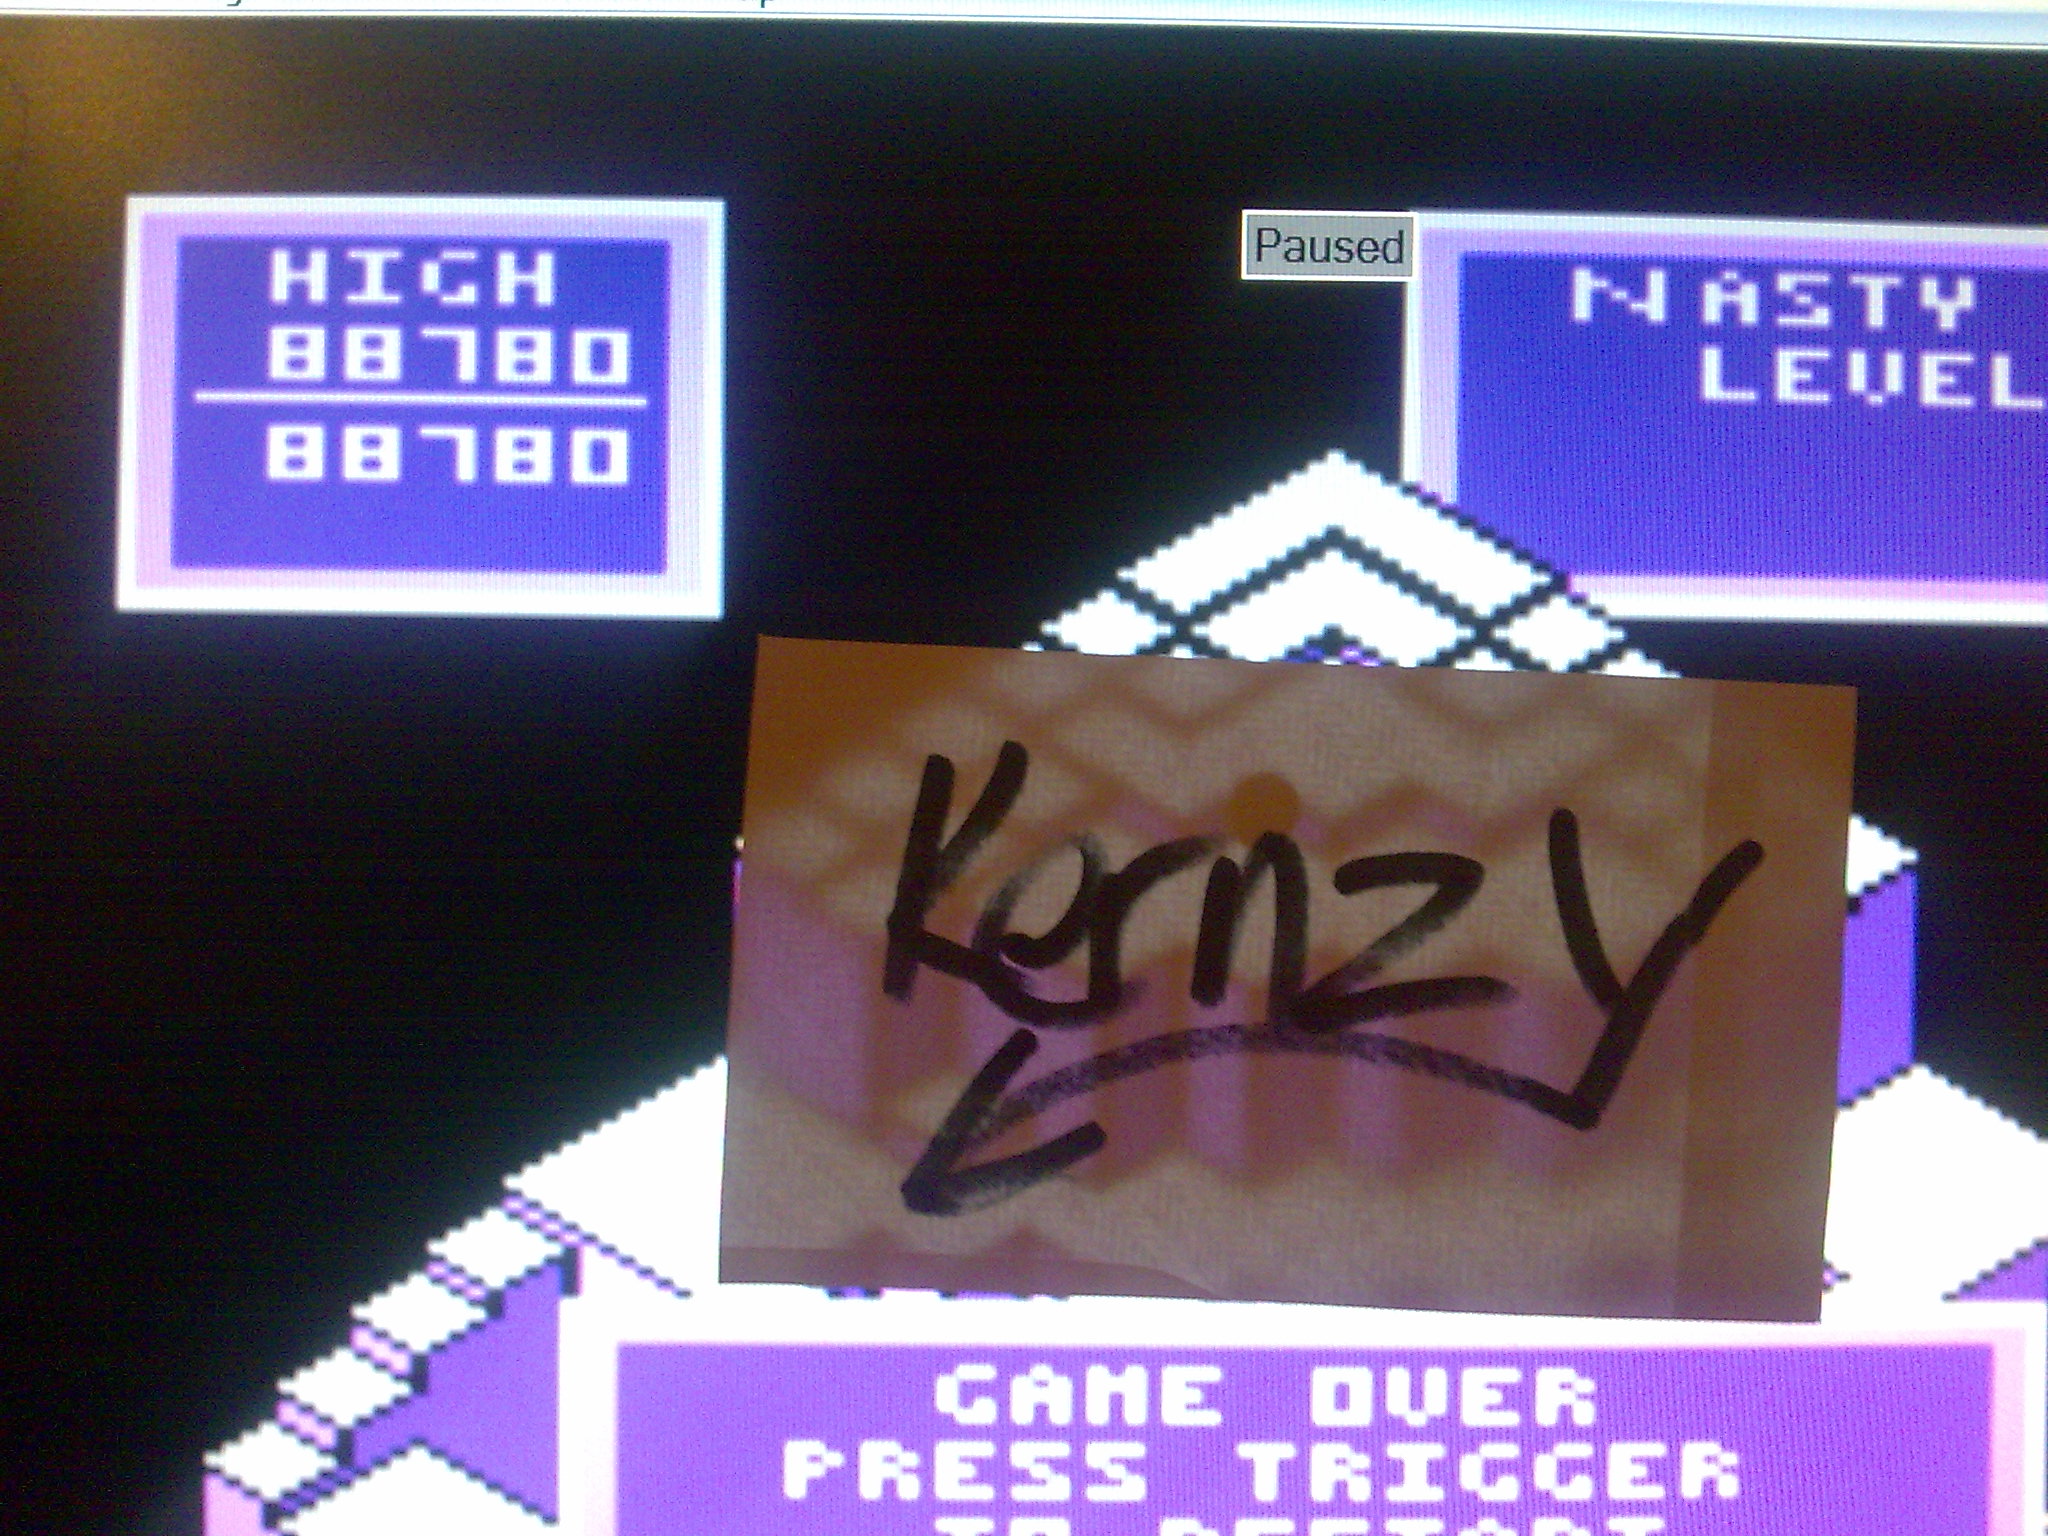 kernzy: Crystal Castles (Atari 400/800/XL/XE Emulated) 88,780 points on 2014-11-12 05:20:49